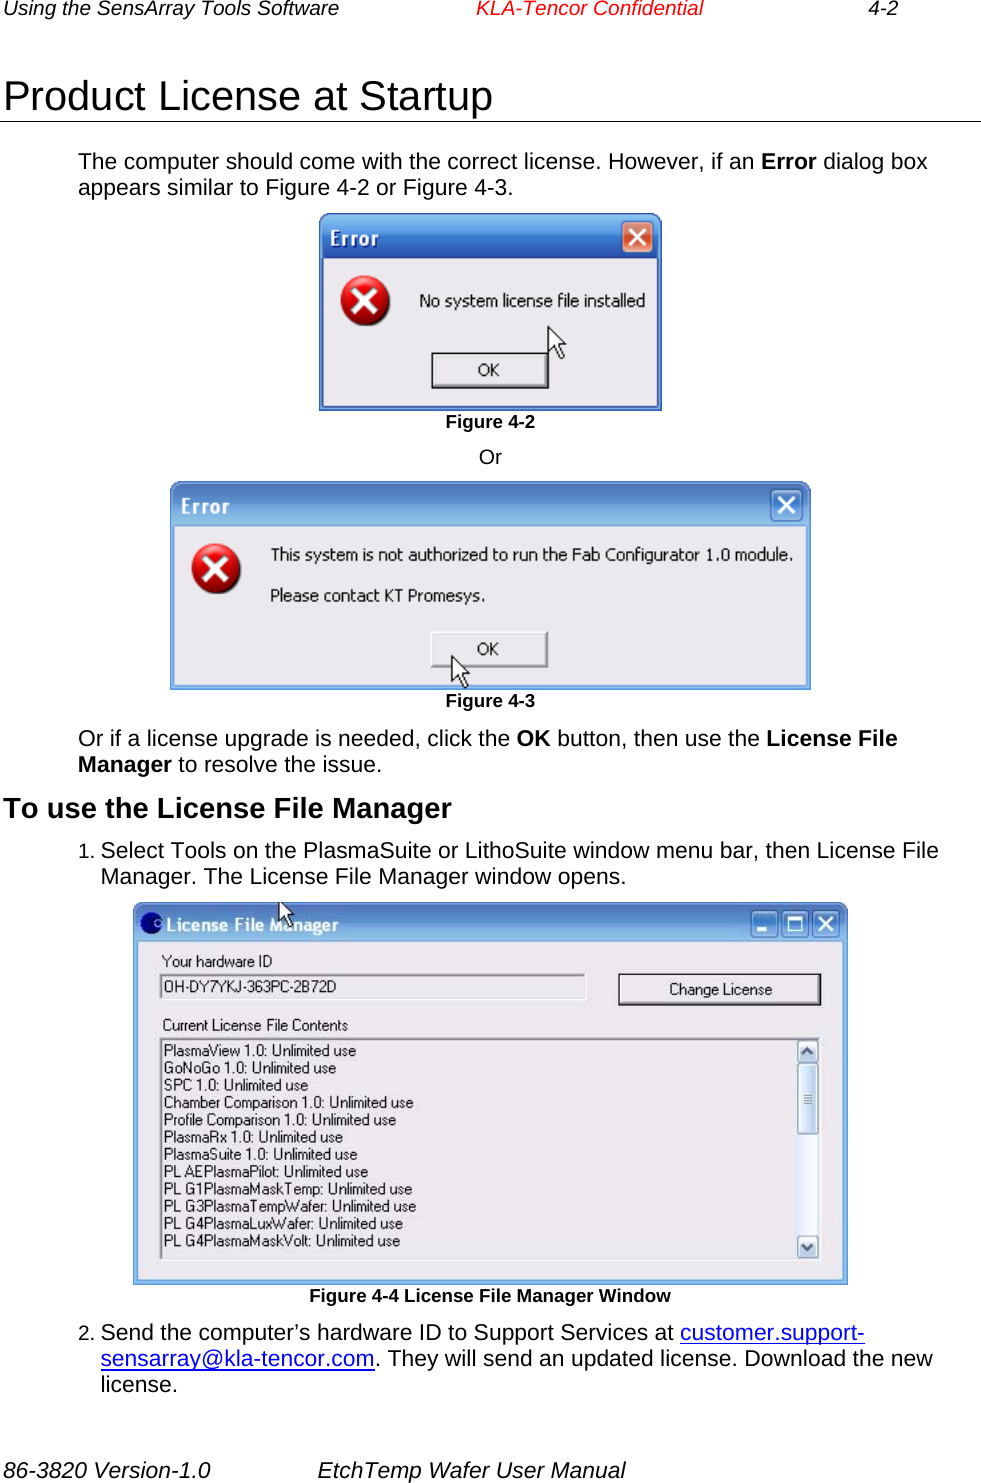 Using the SensArray Tools Software        KLA-Tencor Confidential             4-2 Product License at Startup The computer should come with the correct license. However, if an Error dialog box appears similar to Figure 4-2 or Figure 4-3.  Figure 4-2 Or  Figure 4-3 Or if a license upgrade is needed, click the OK button, then use the License File Manager to resolve the issue. To use the License File Manager 1. Select Tools on the PlasmaSuite or LithoSuite window menu bar, then License File Manager. The License File Manager window opens.  Figure 4-4 License File Manager Window 2. Send the computer’s hardware ID to Support Services at customer.support-sensarray@kla-tencor.com. They will send an updated license. Download the new license. 86-3820 Version-1.0  EtchTemp Wafer User Manual 